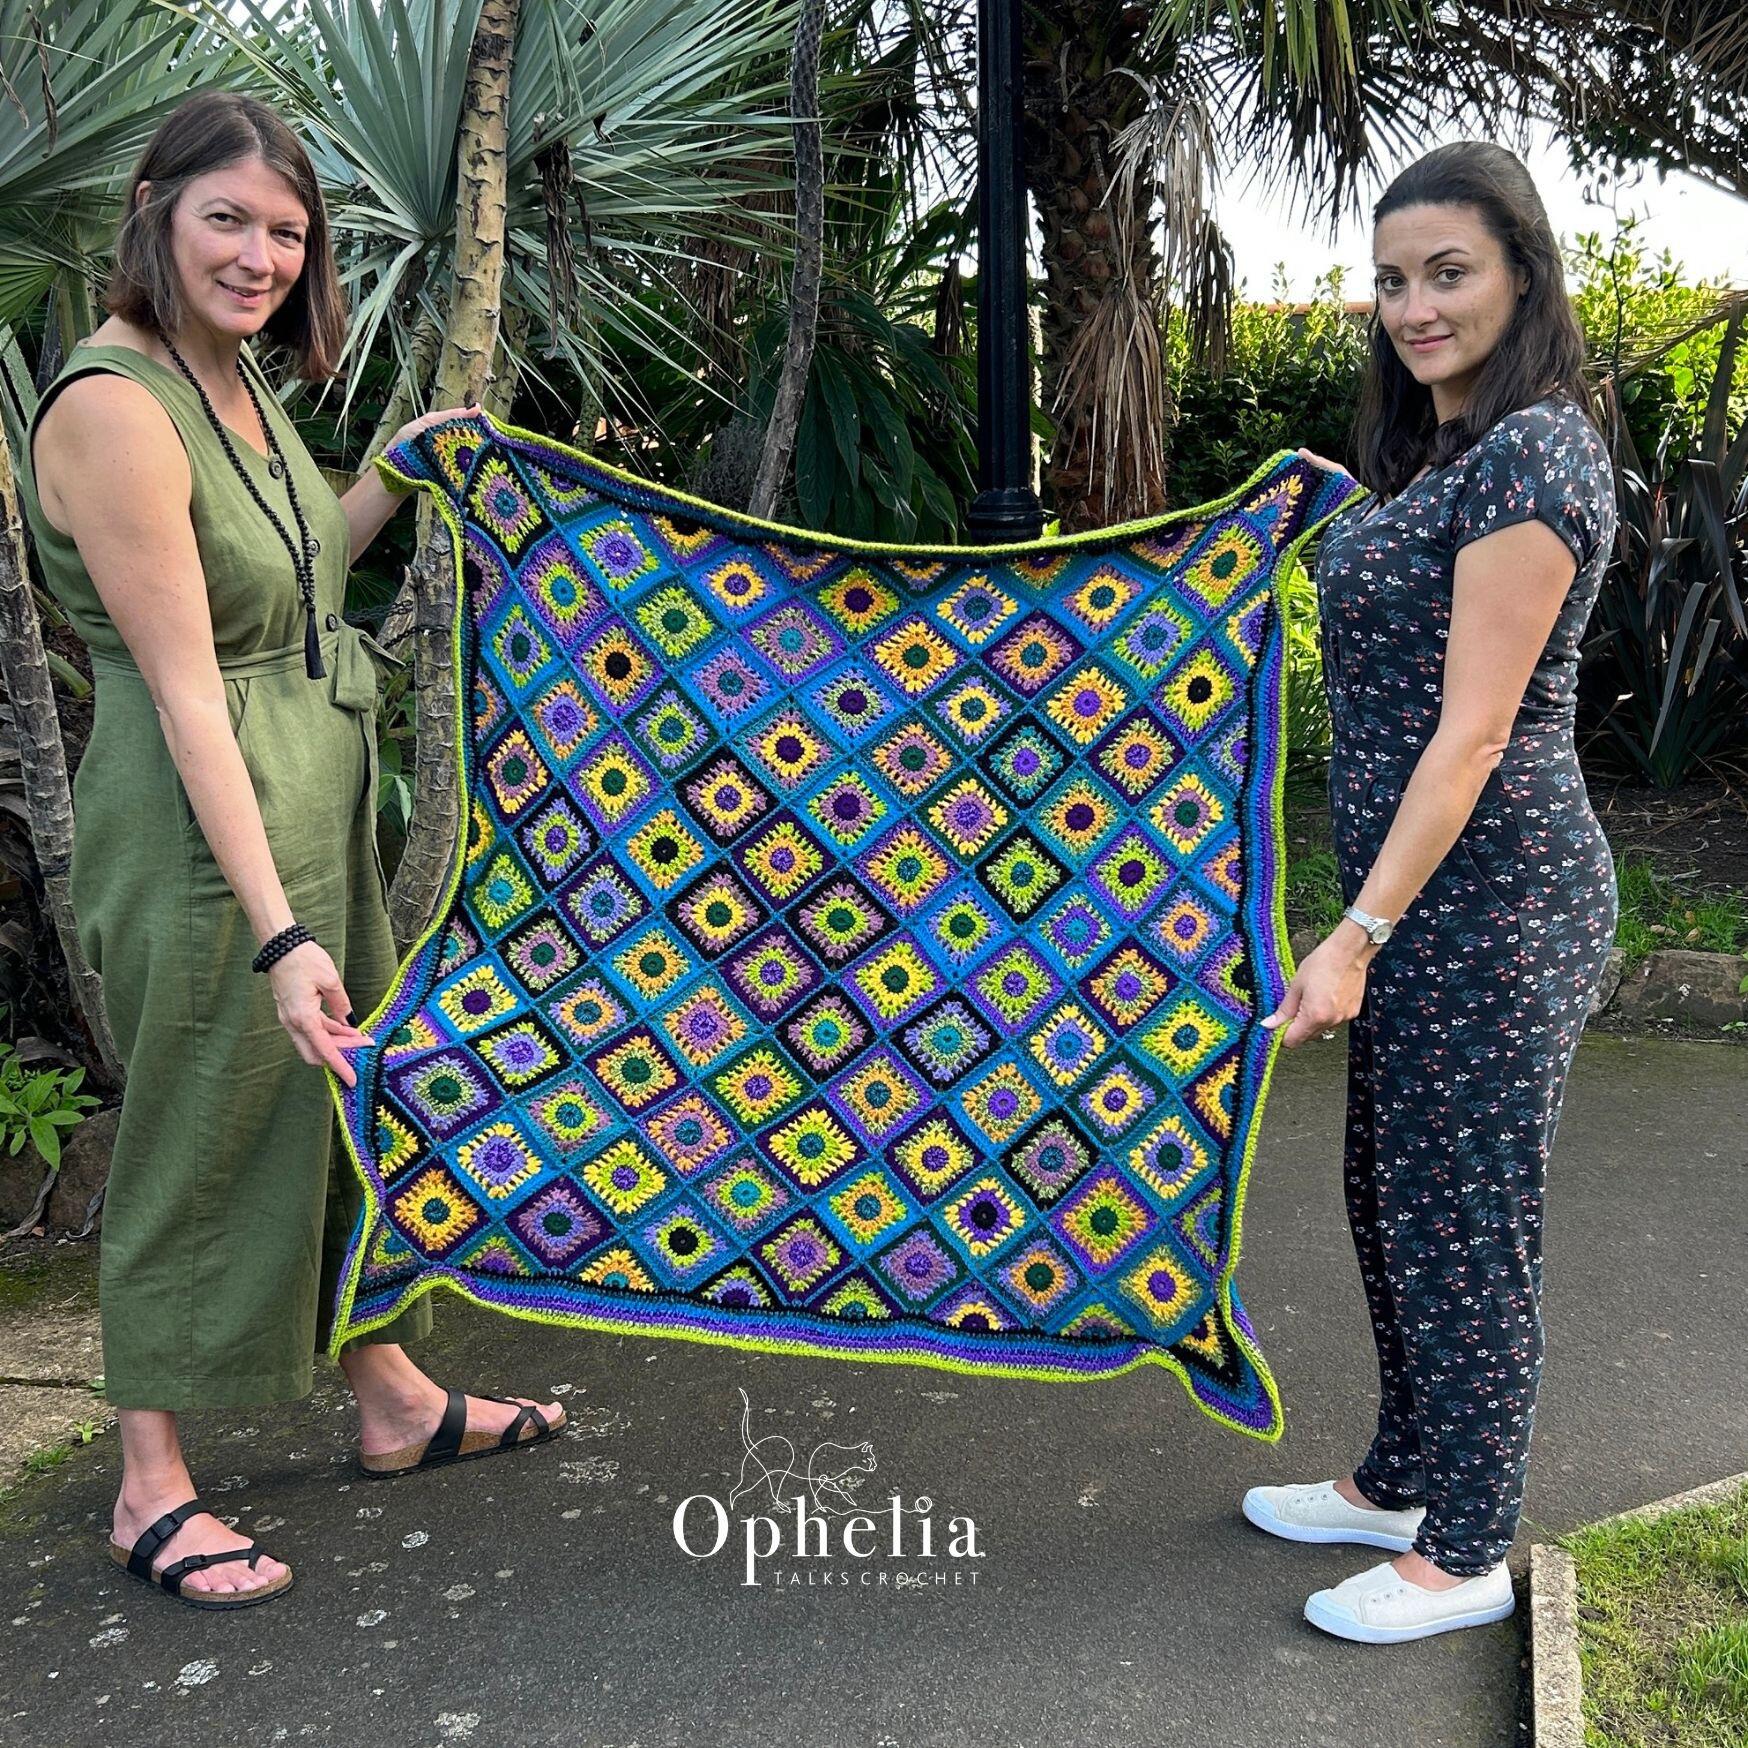 Anja and Emma holding the peacock blanket